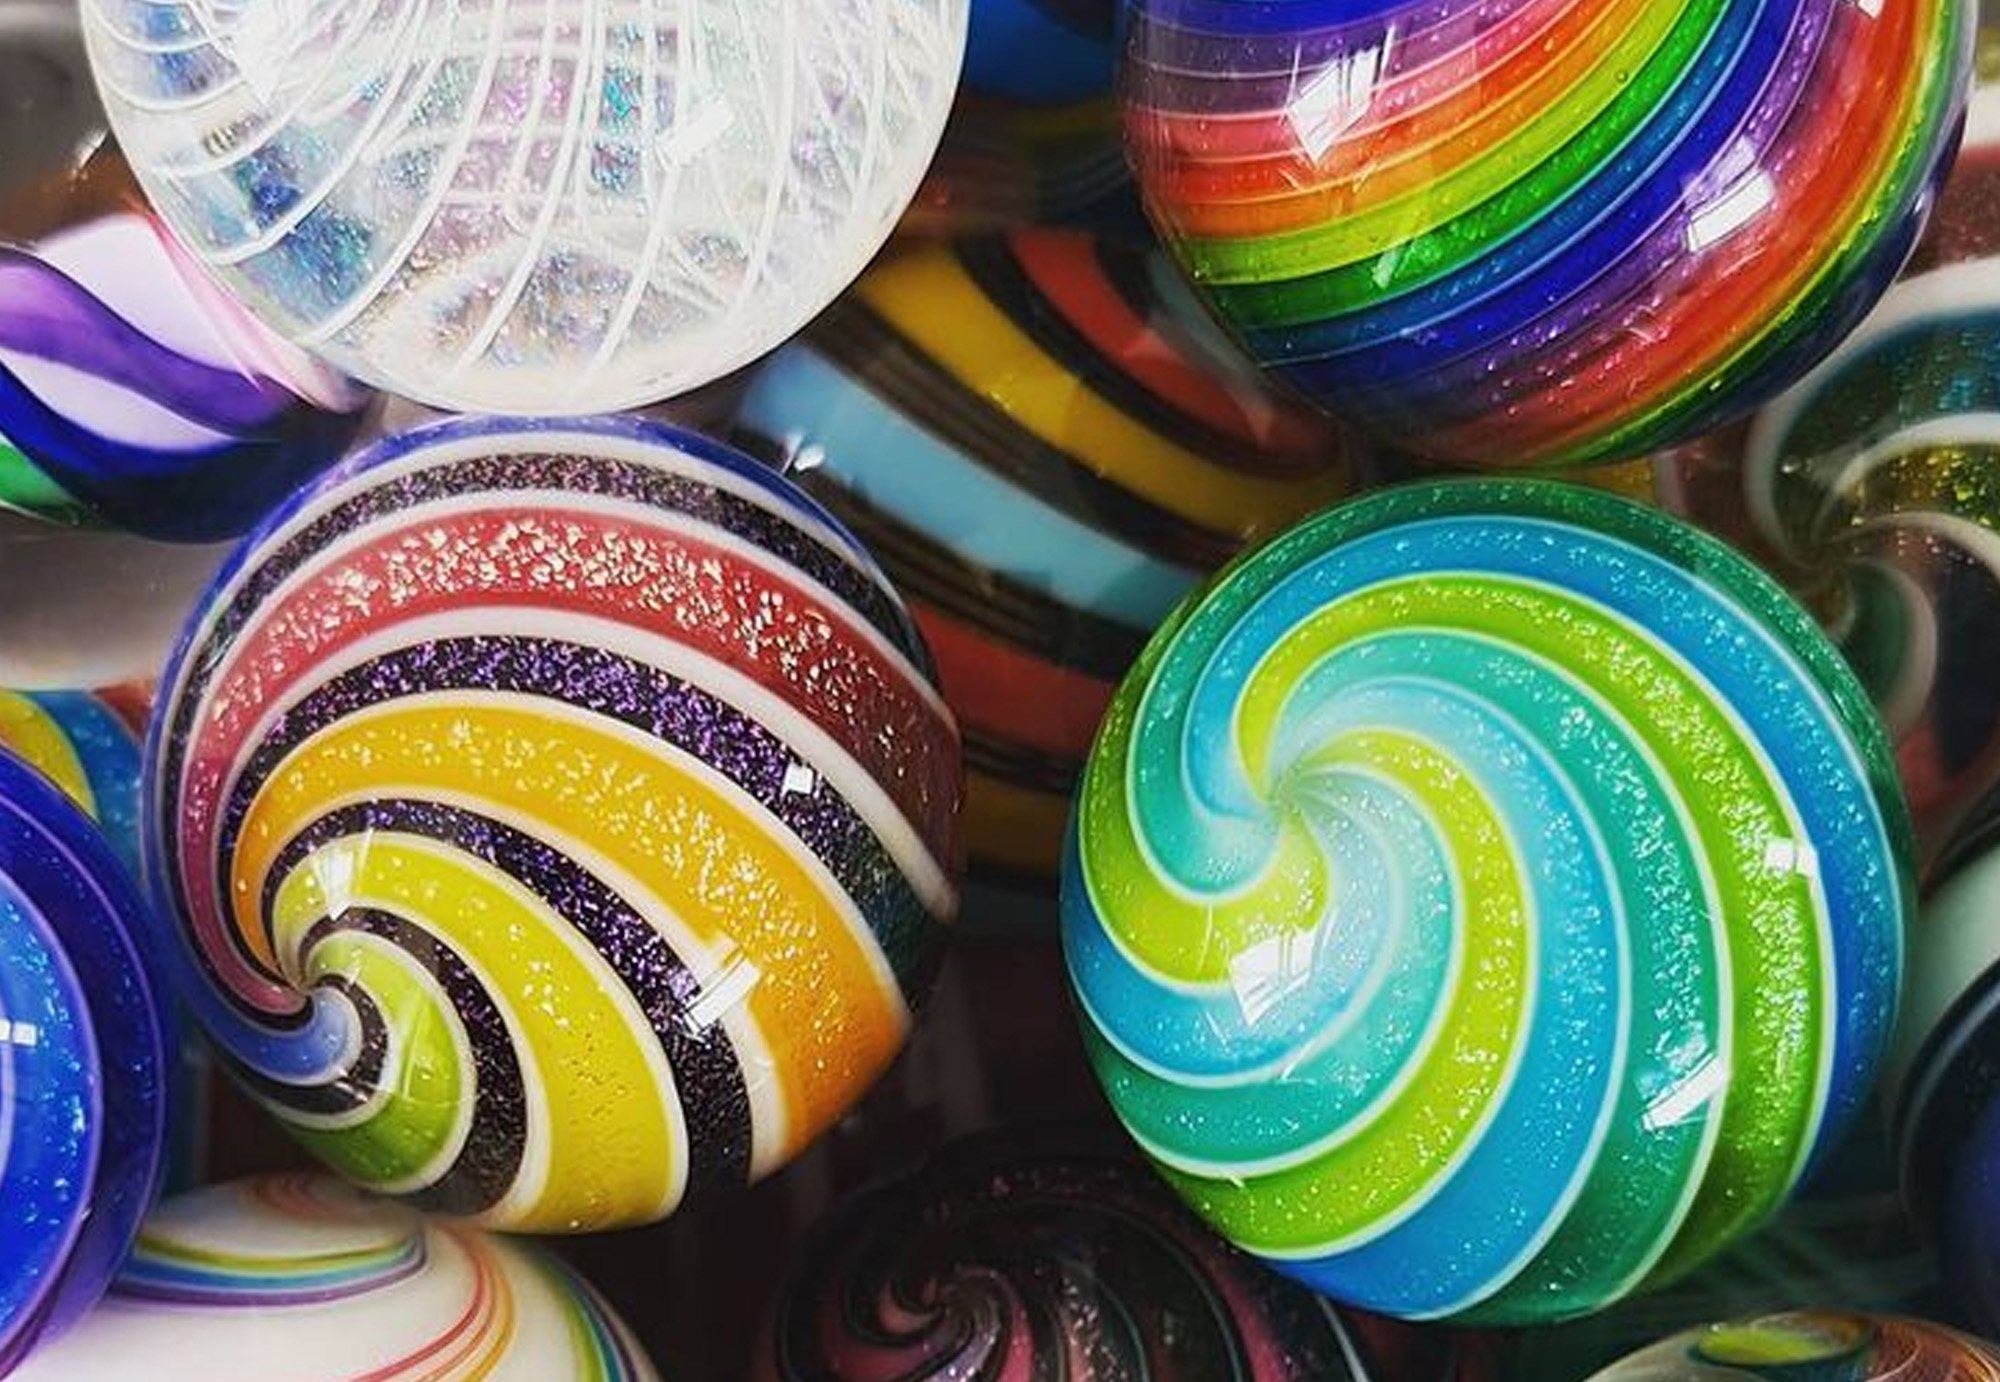 The Marvel of Making Marbles - House of Marbles